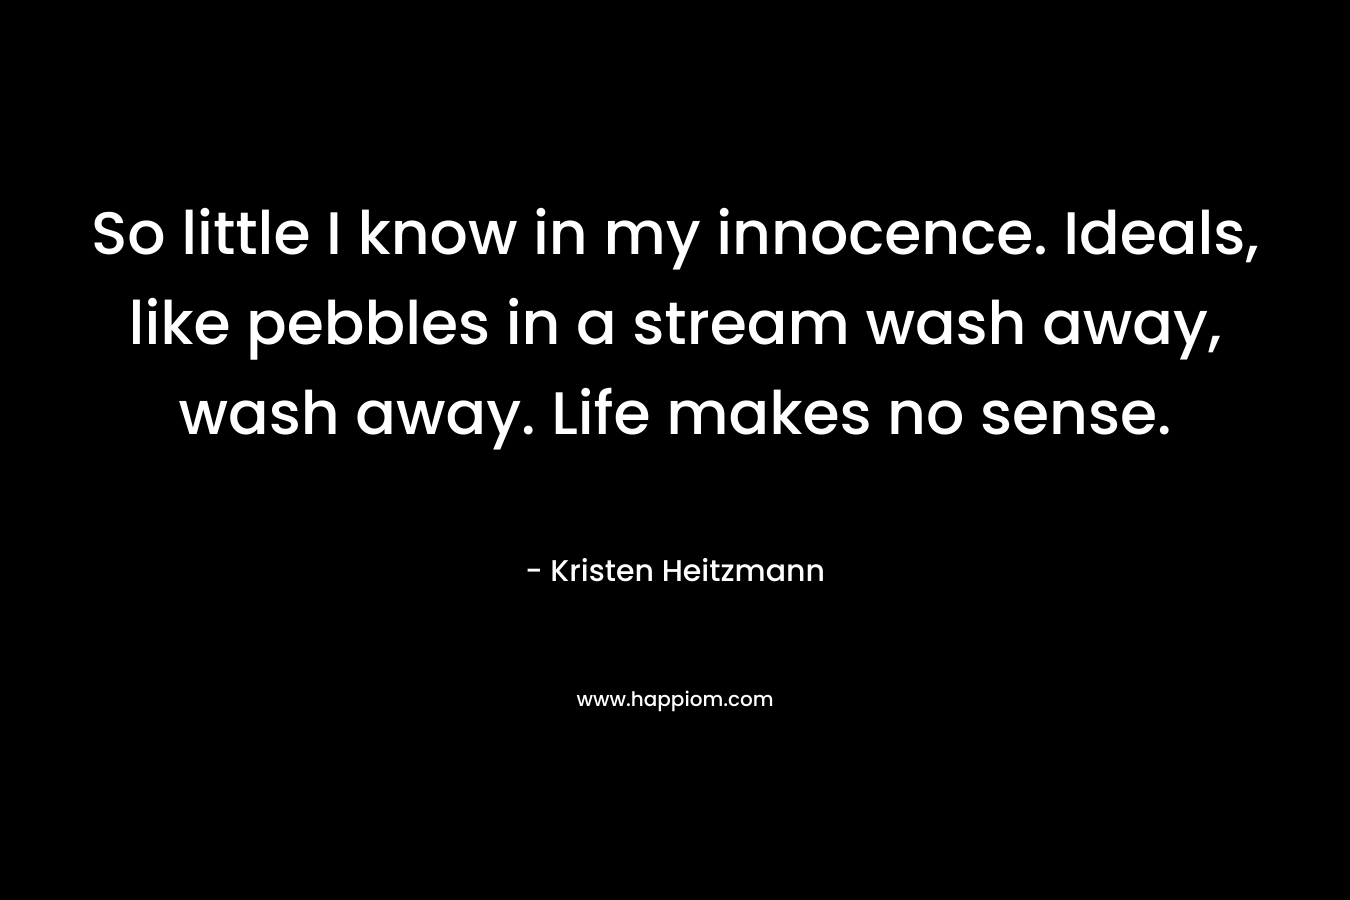 So little I know in my innocence. Ideals, like pebbles in a stream wash away, wash away. Life makes no sense. – Kristen Heitzmann